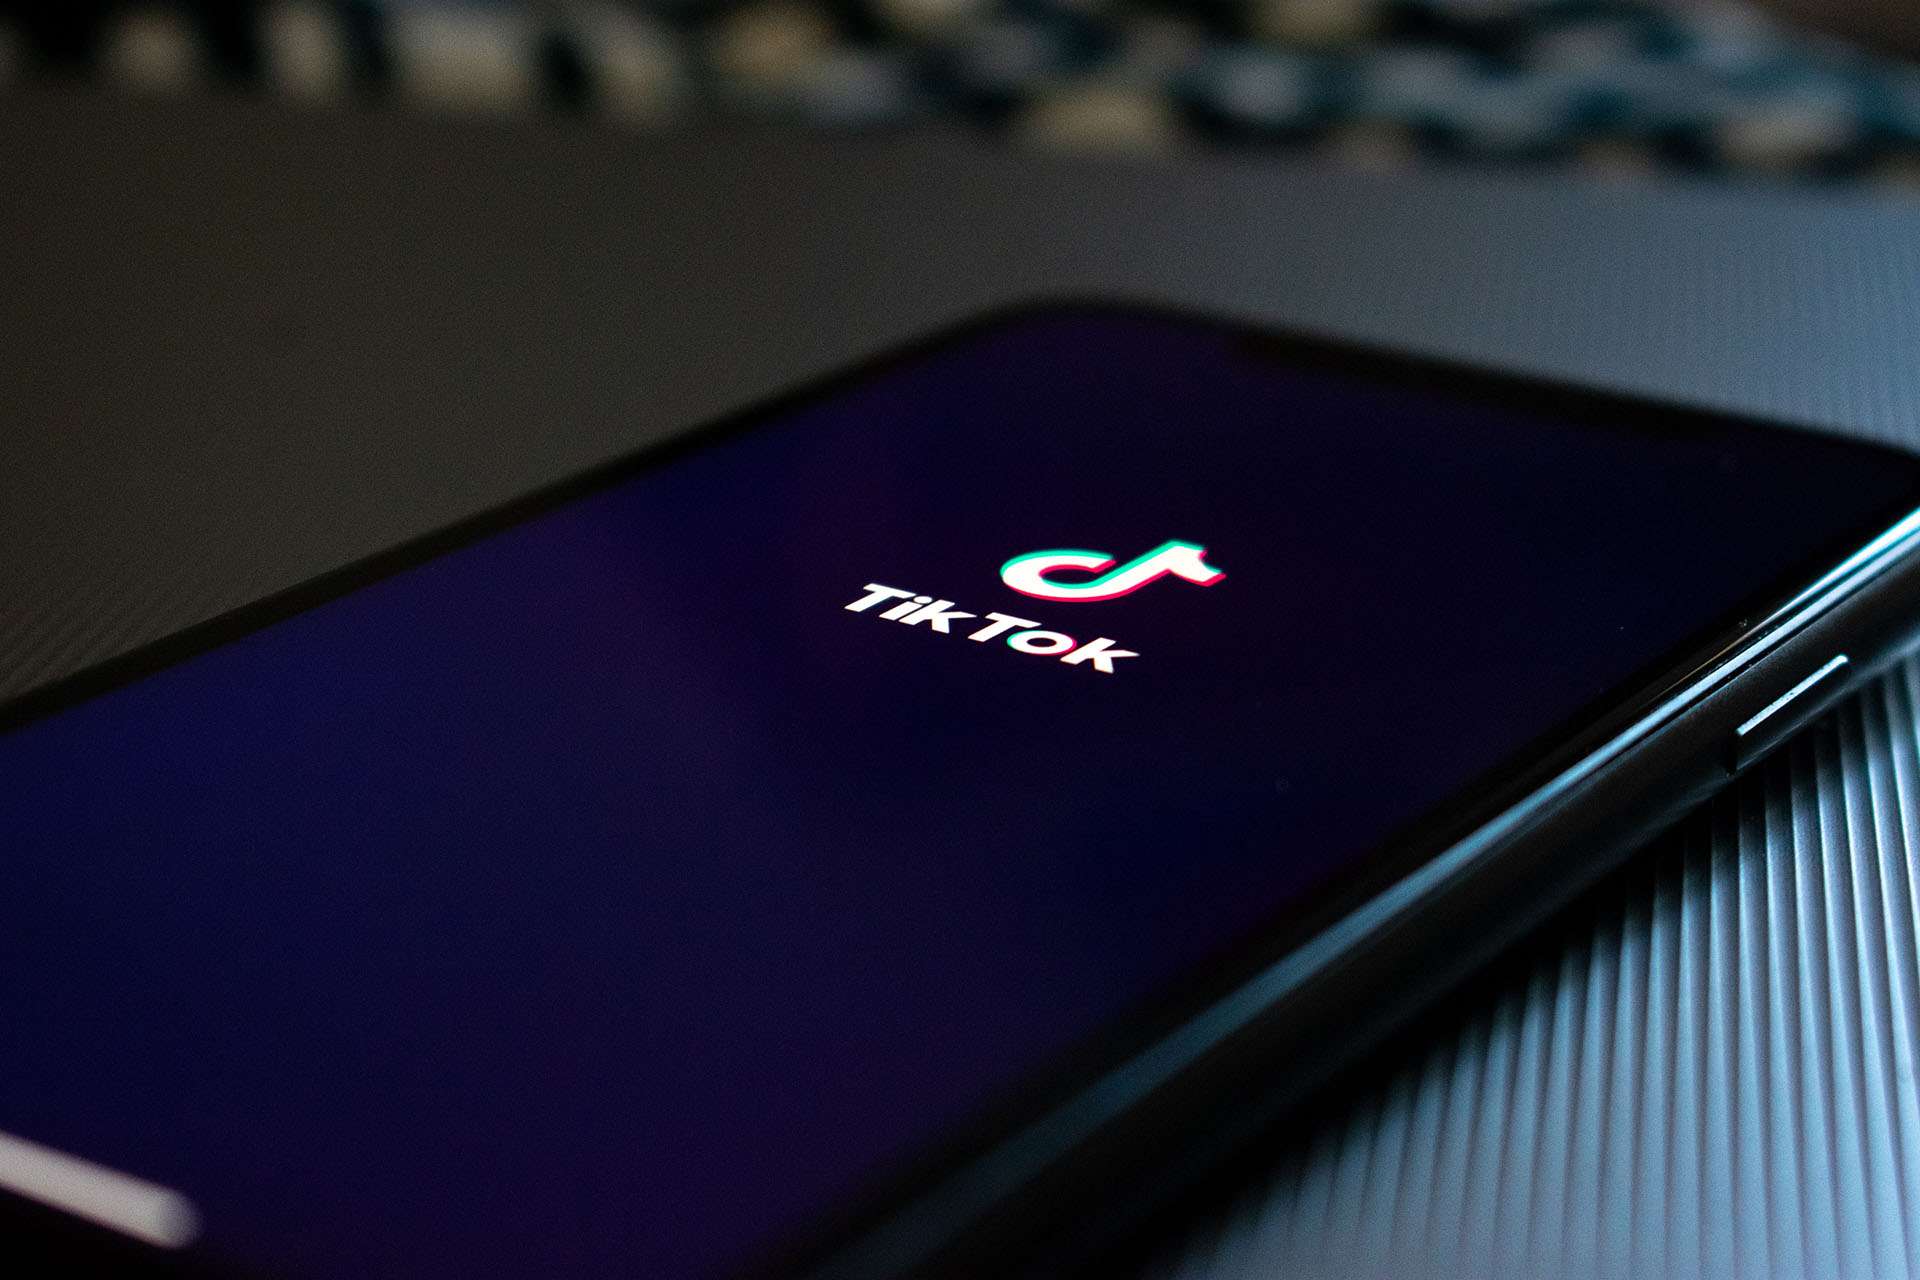 A marketers introduction to TikTok